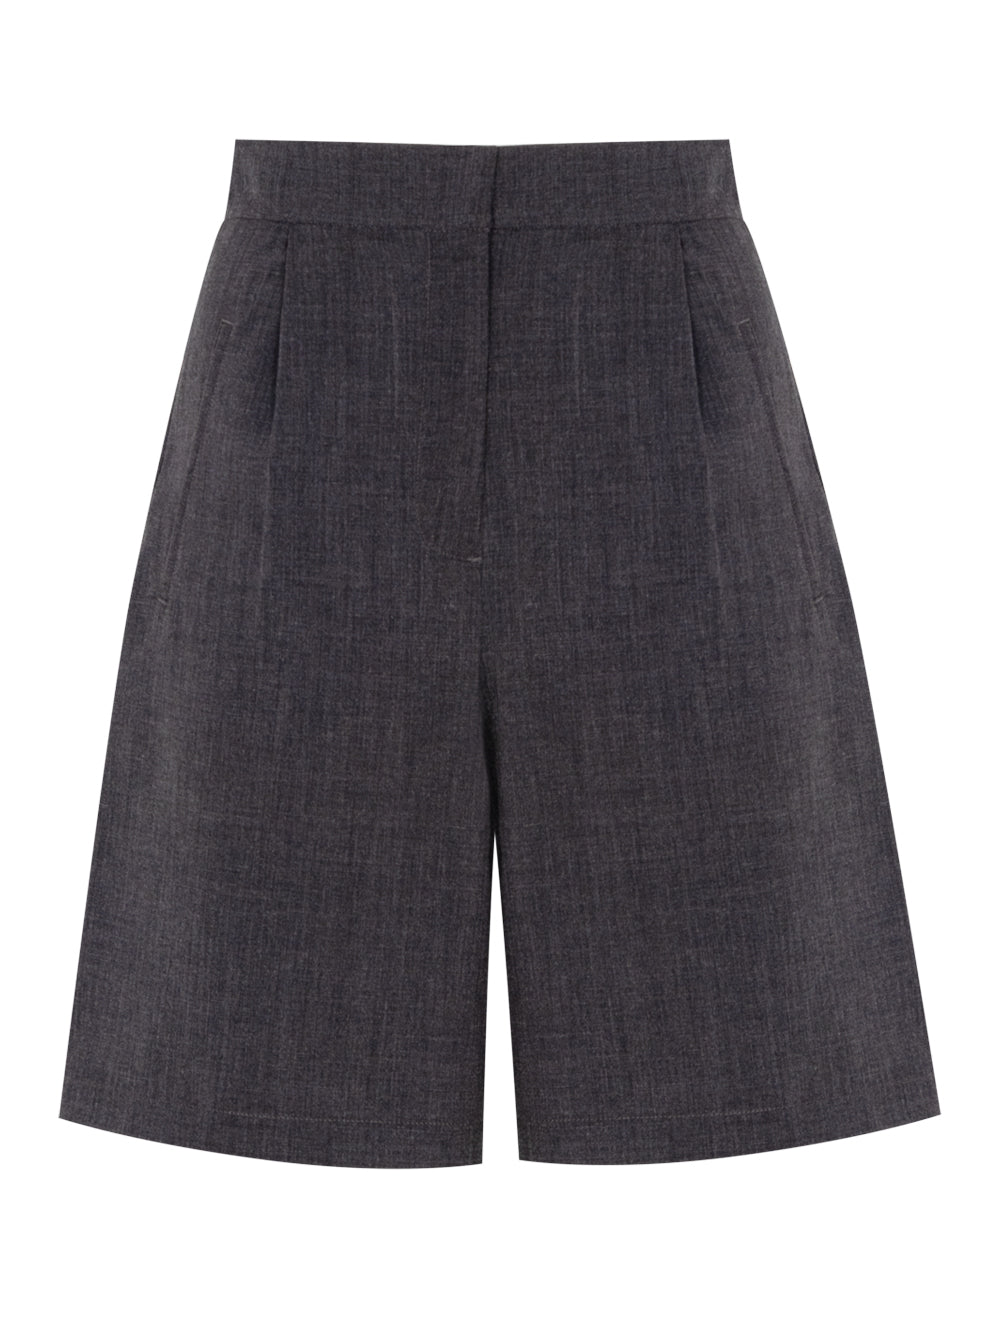 Pleated Shorts (Anthracite)